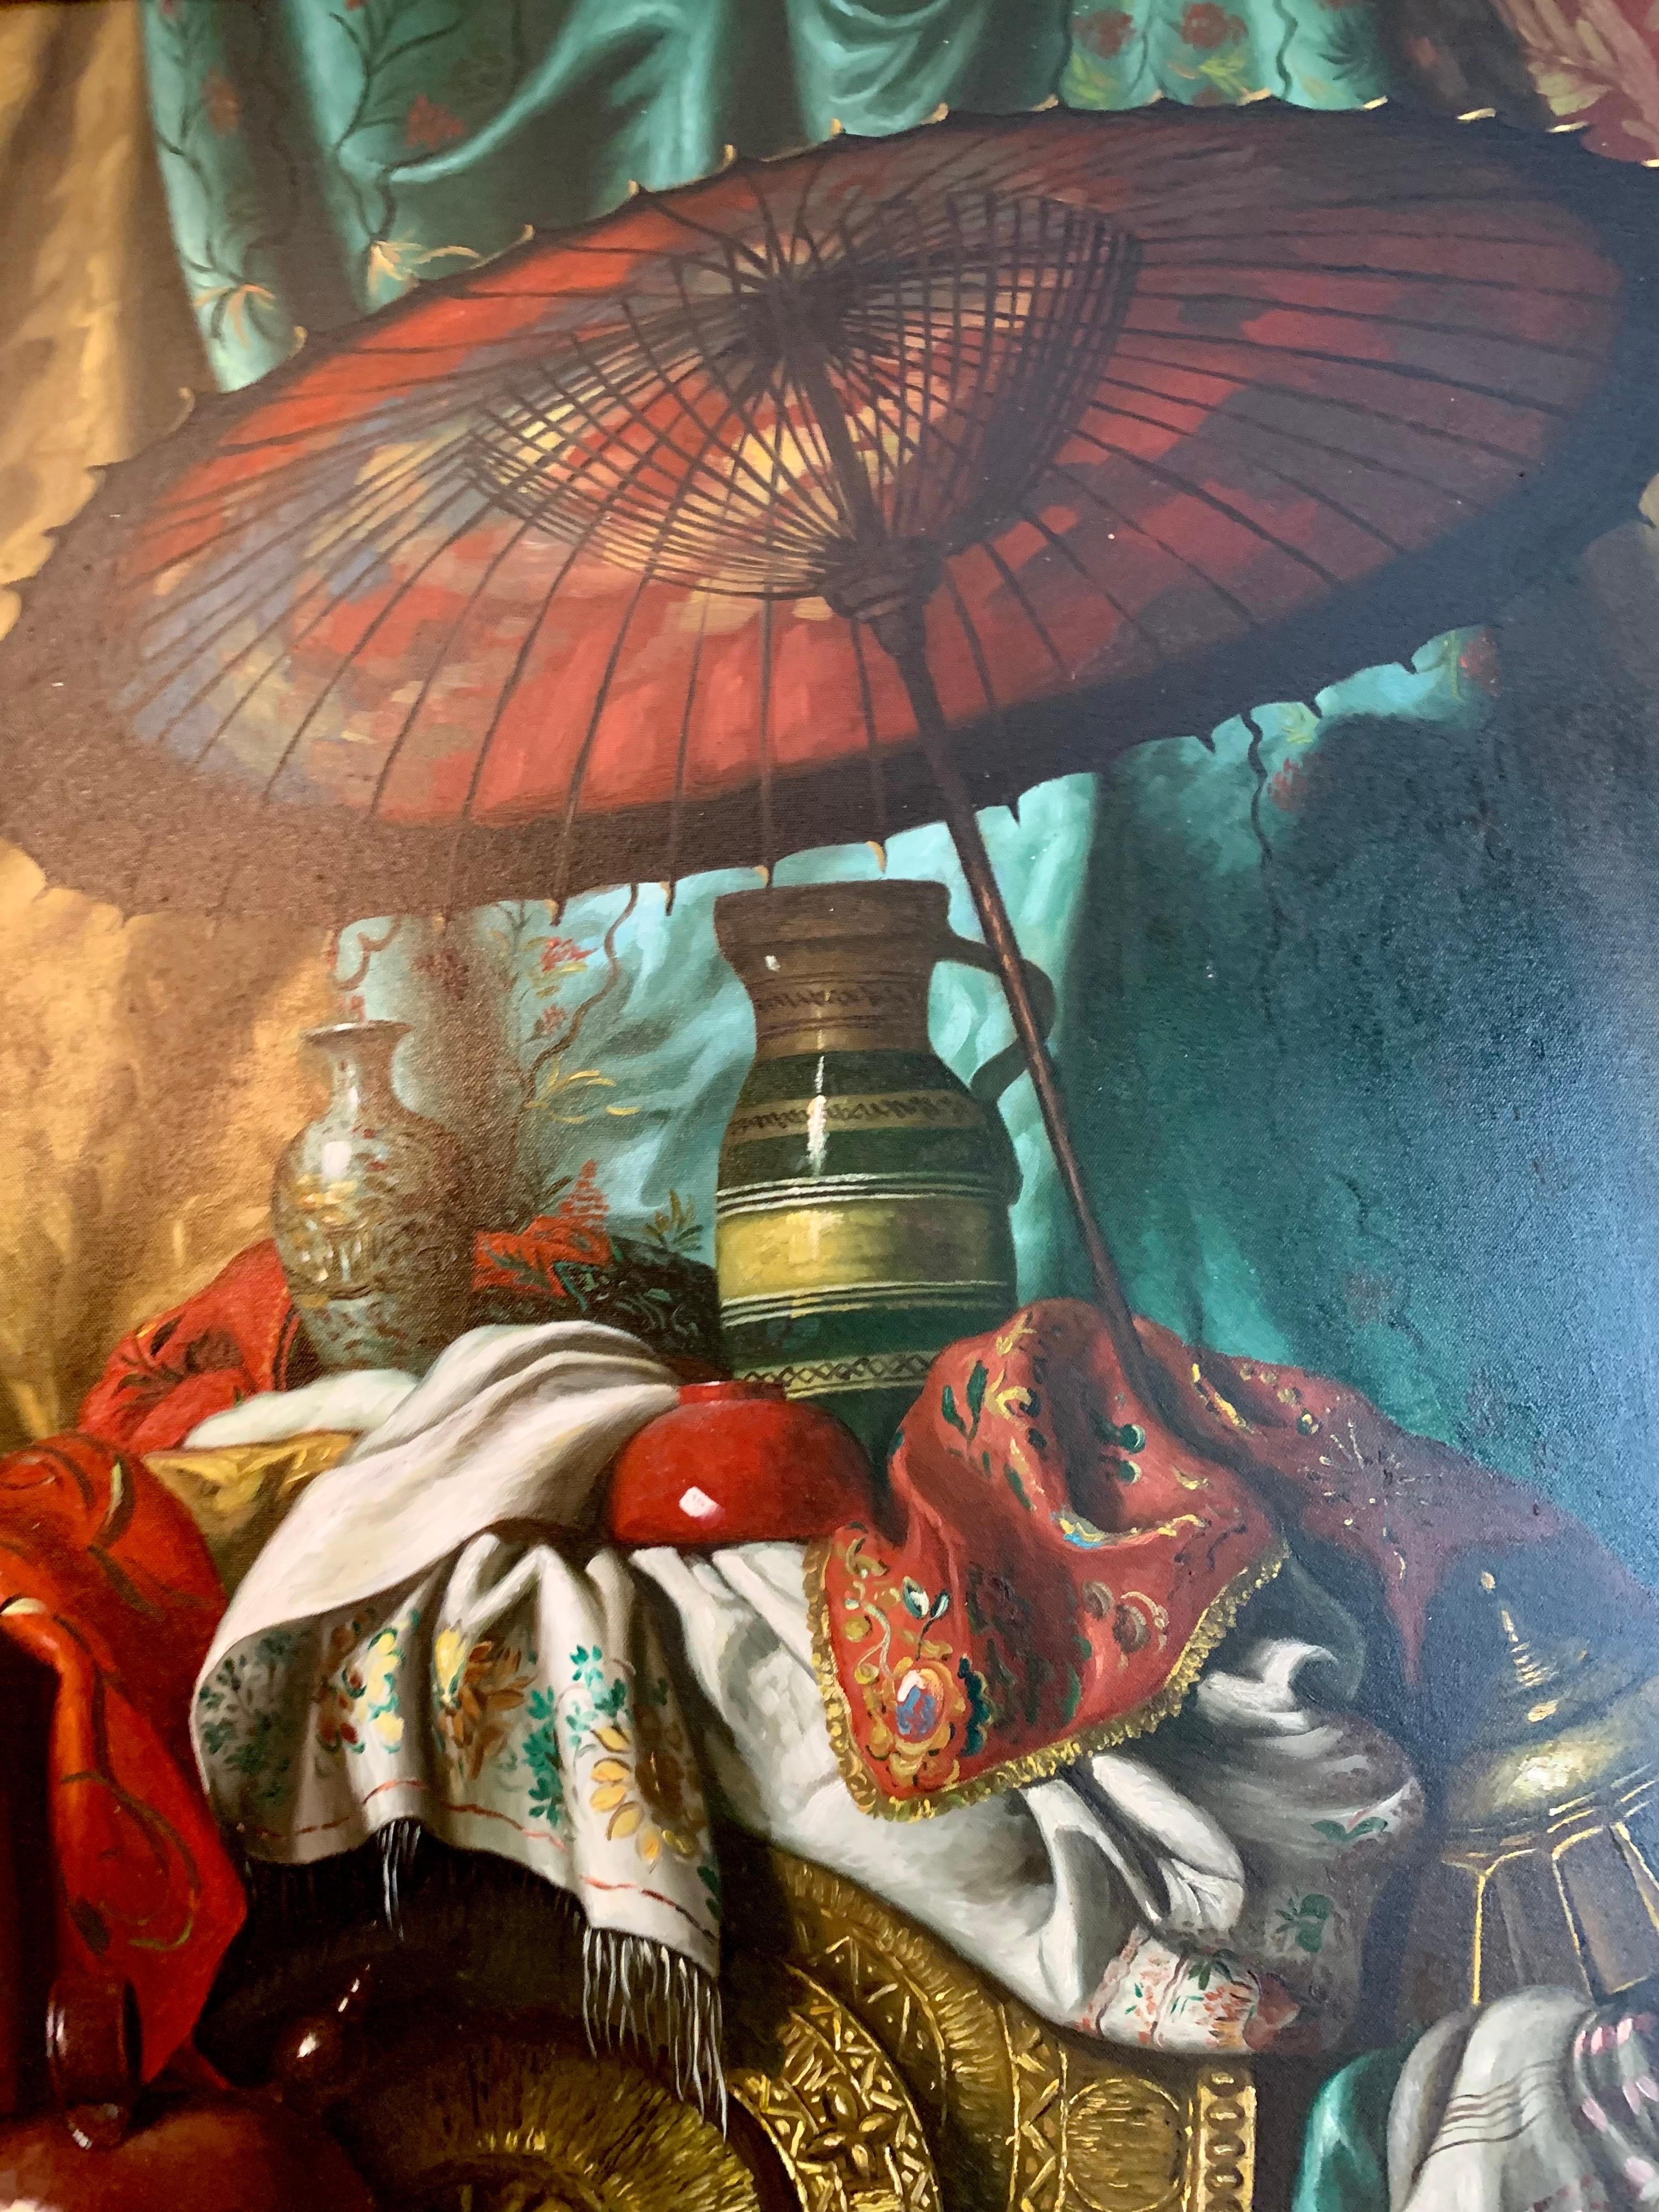 Canvas Iconic Large Original Signed Still Life Oil Painting with a Chinese Parasol